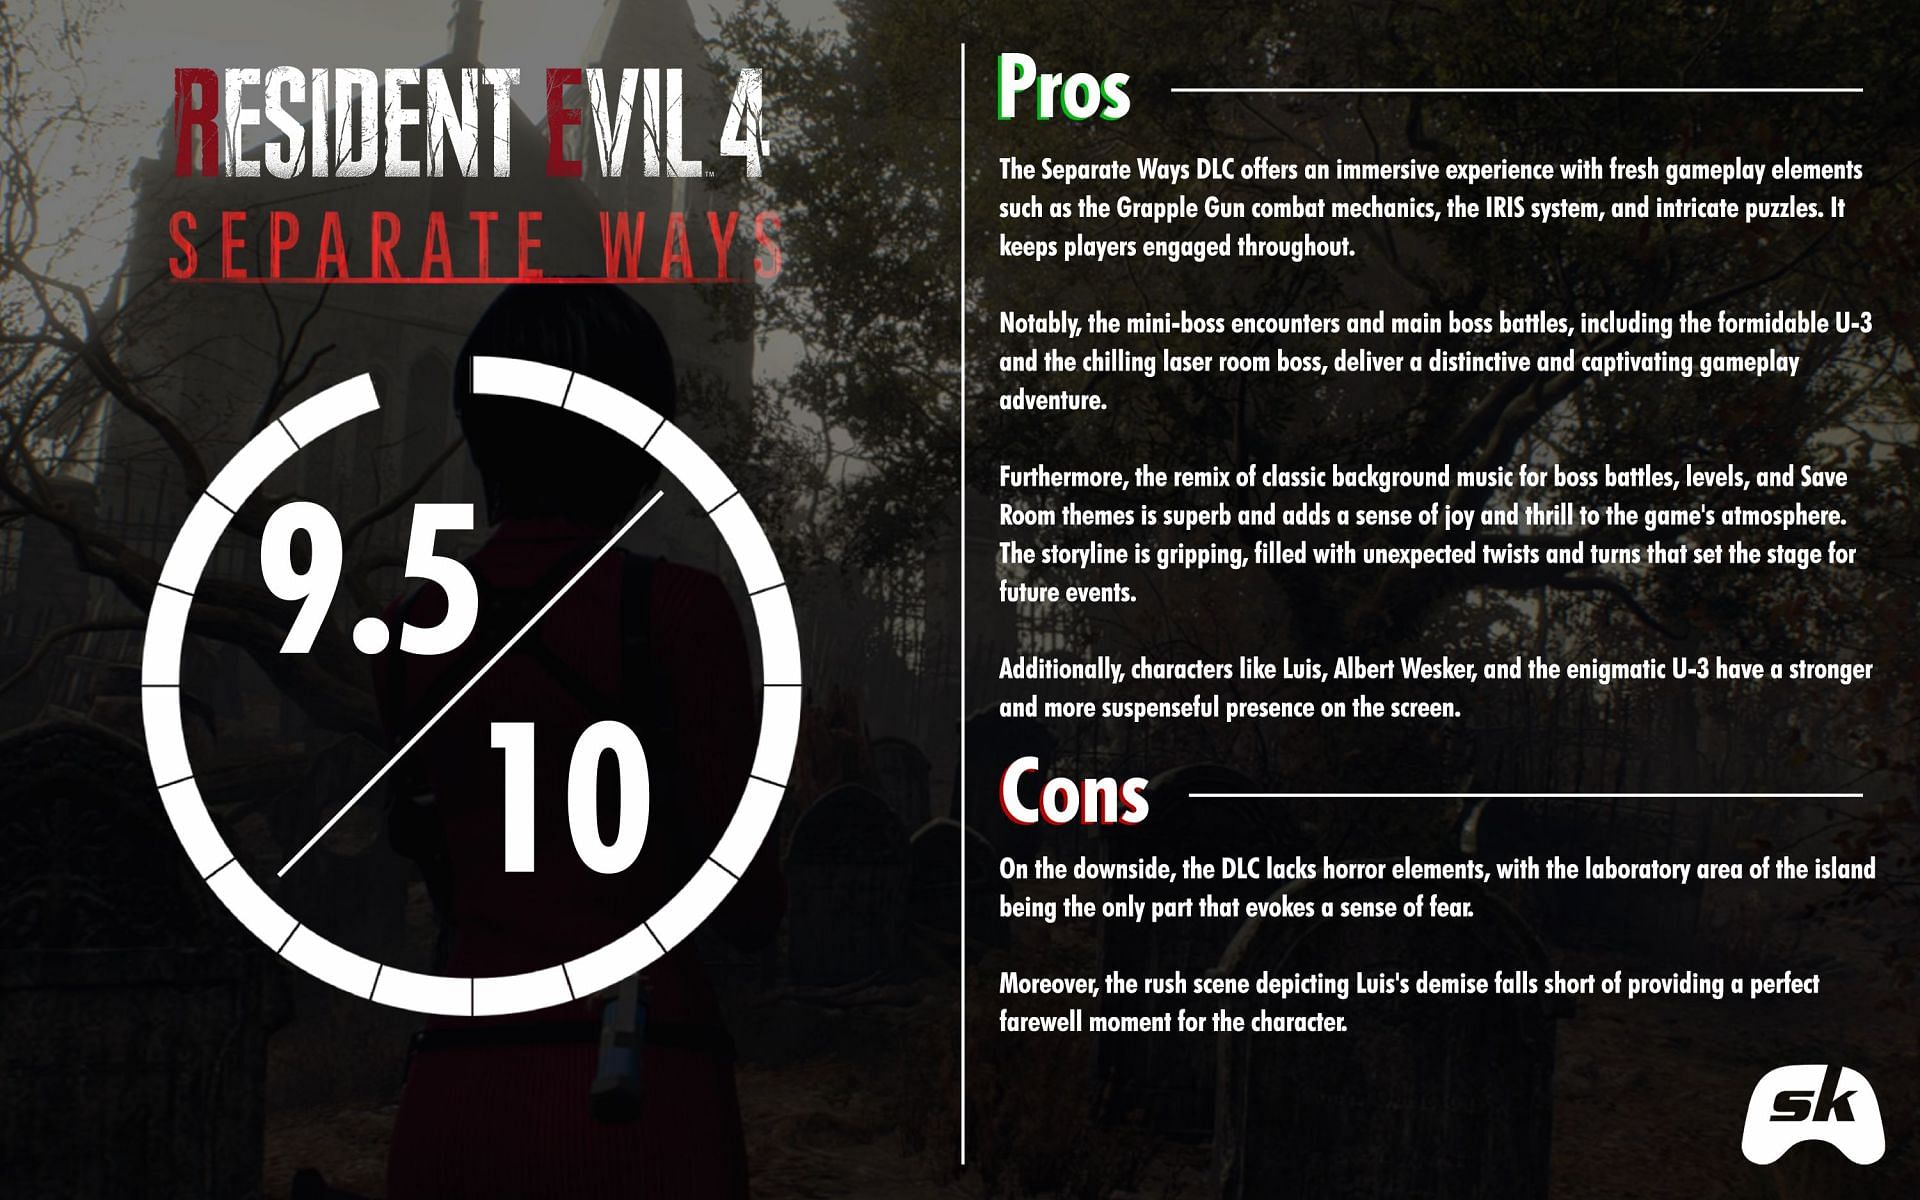 The Resident Evil 4 Separate Ways DLC offers an exhilarating campaign with demanding objectives and a captivating storyline that enhances the overall gaming experience. (Image via Sportskeeda)